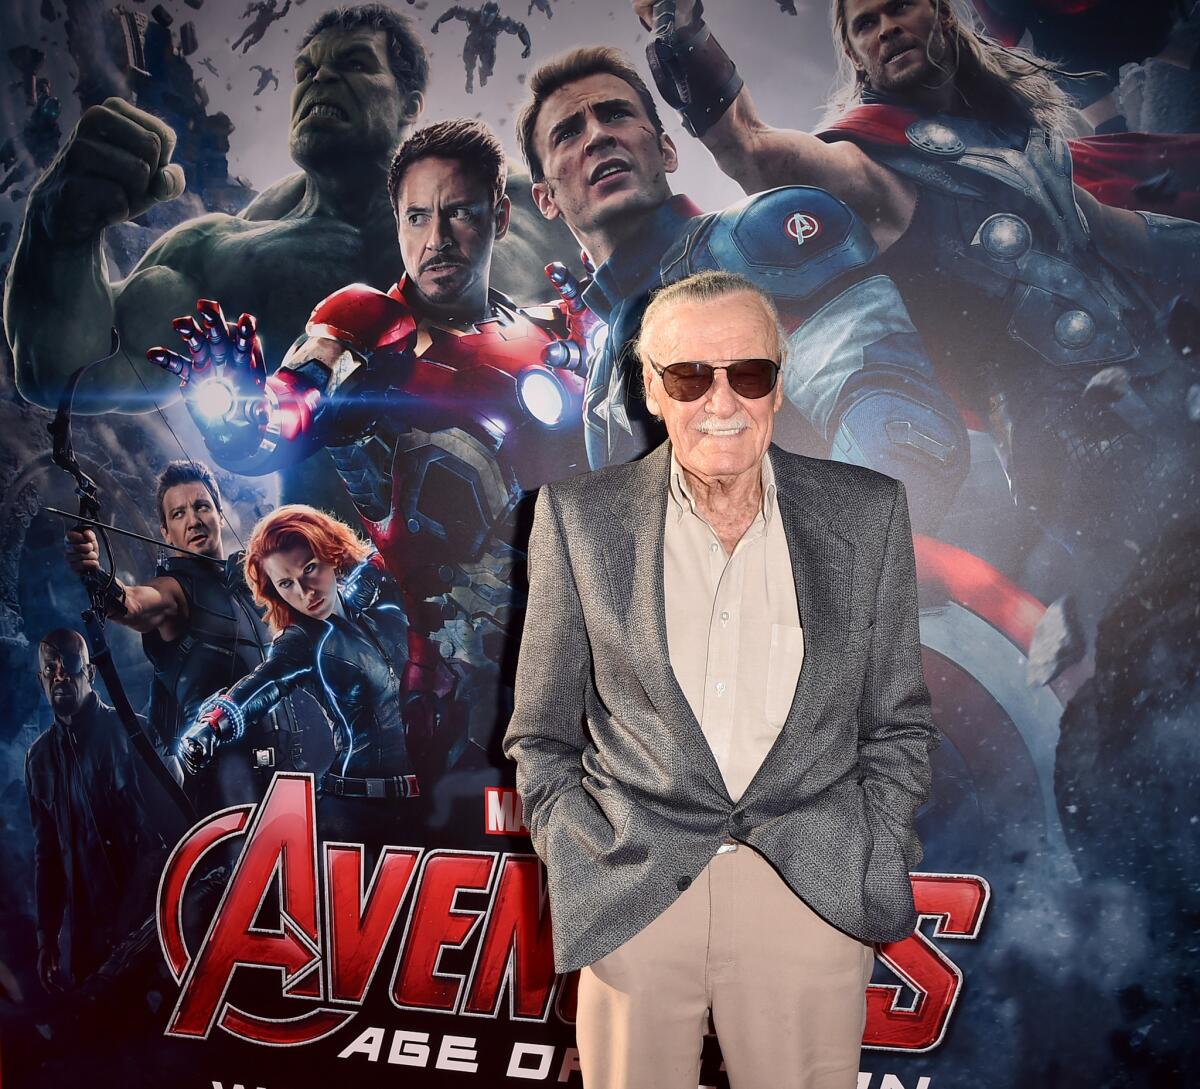 Stan Lee attends the premiere of Marvel's "Avengers: Age Of Ultron" at Dolby Theatre in Hollywood on April 13.